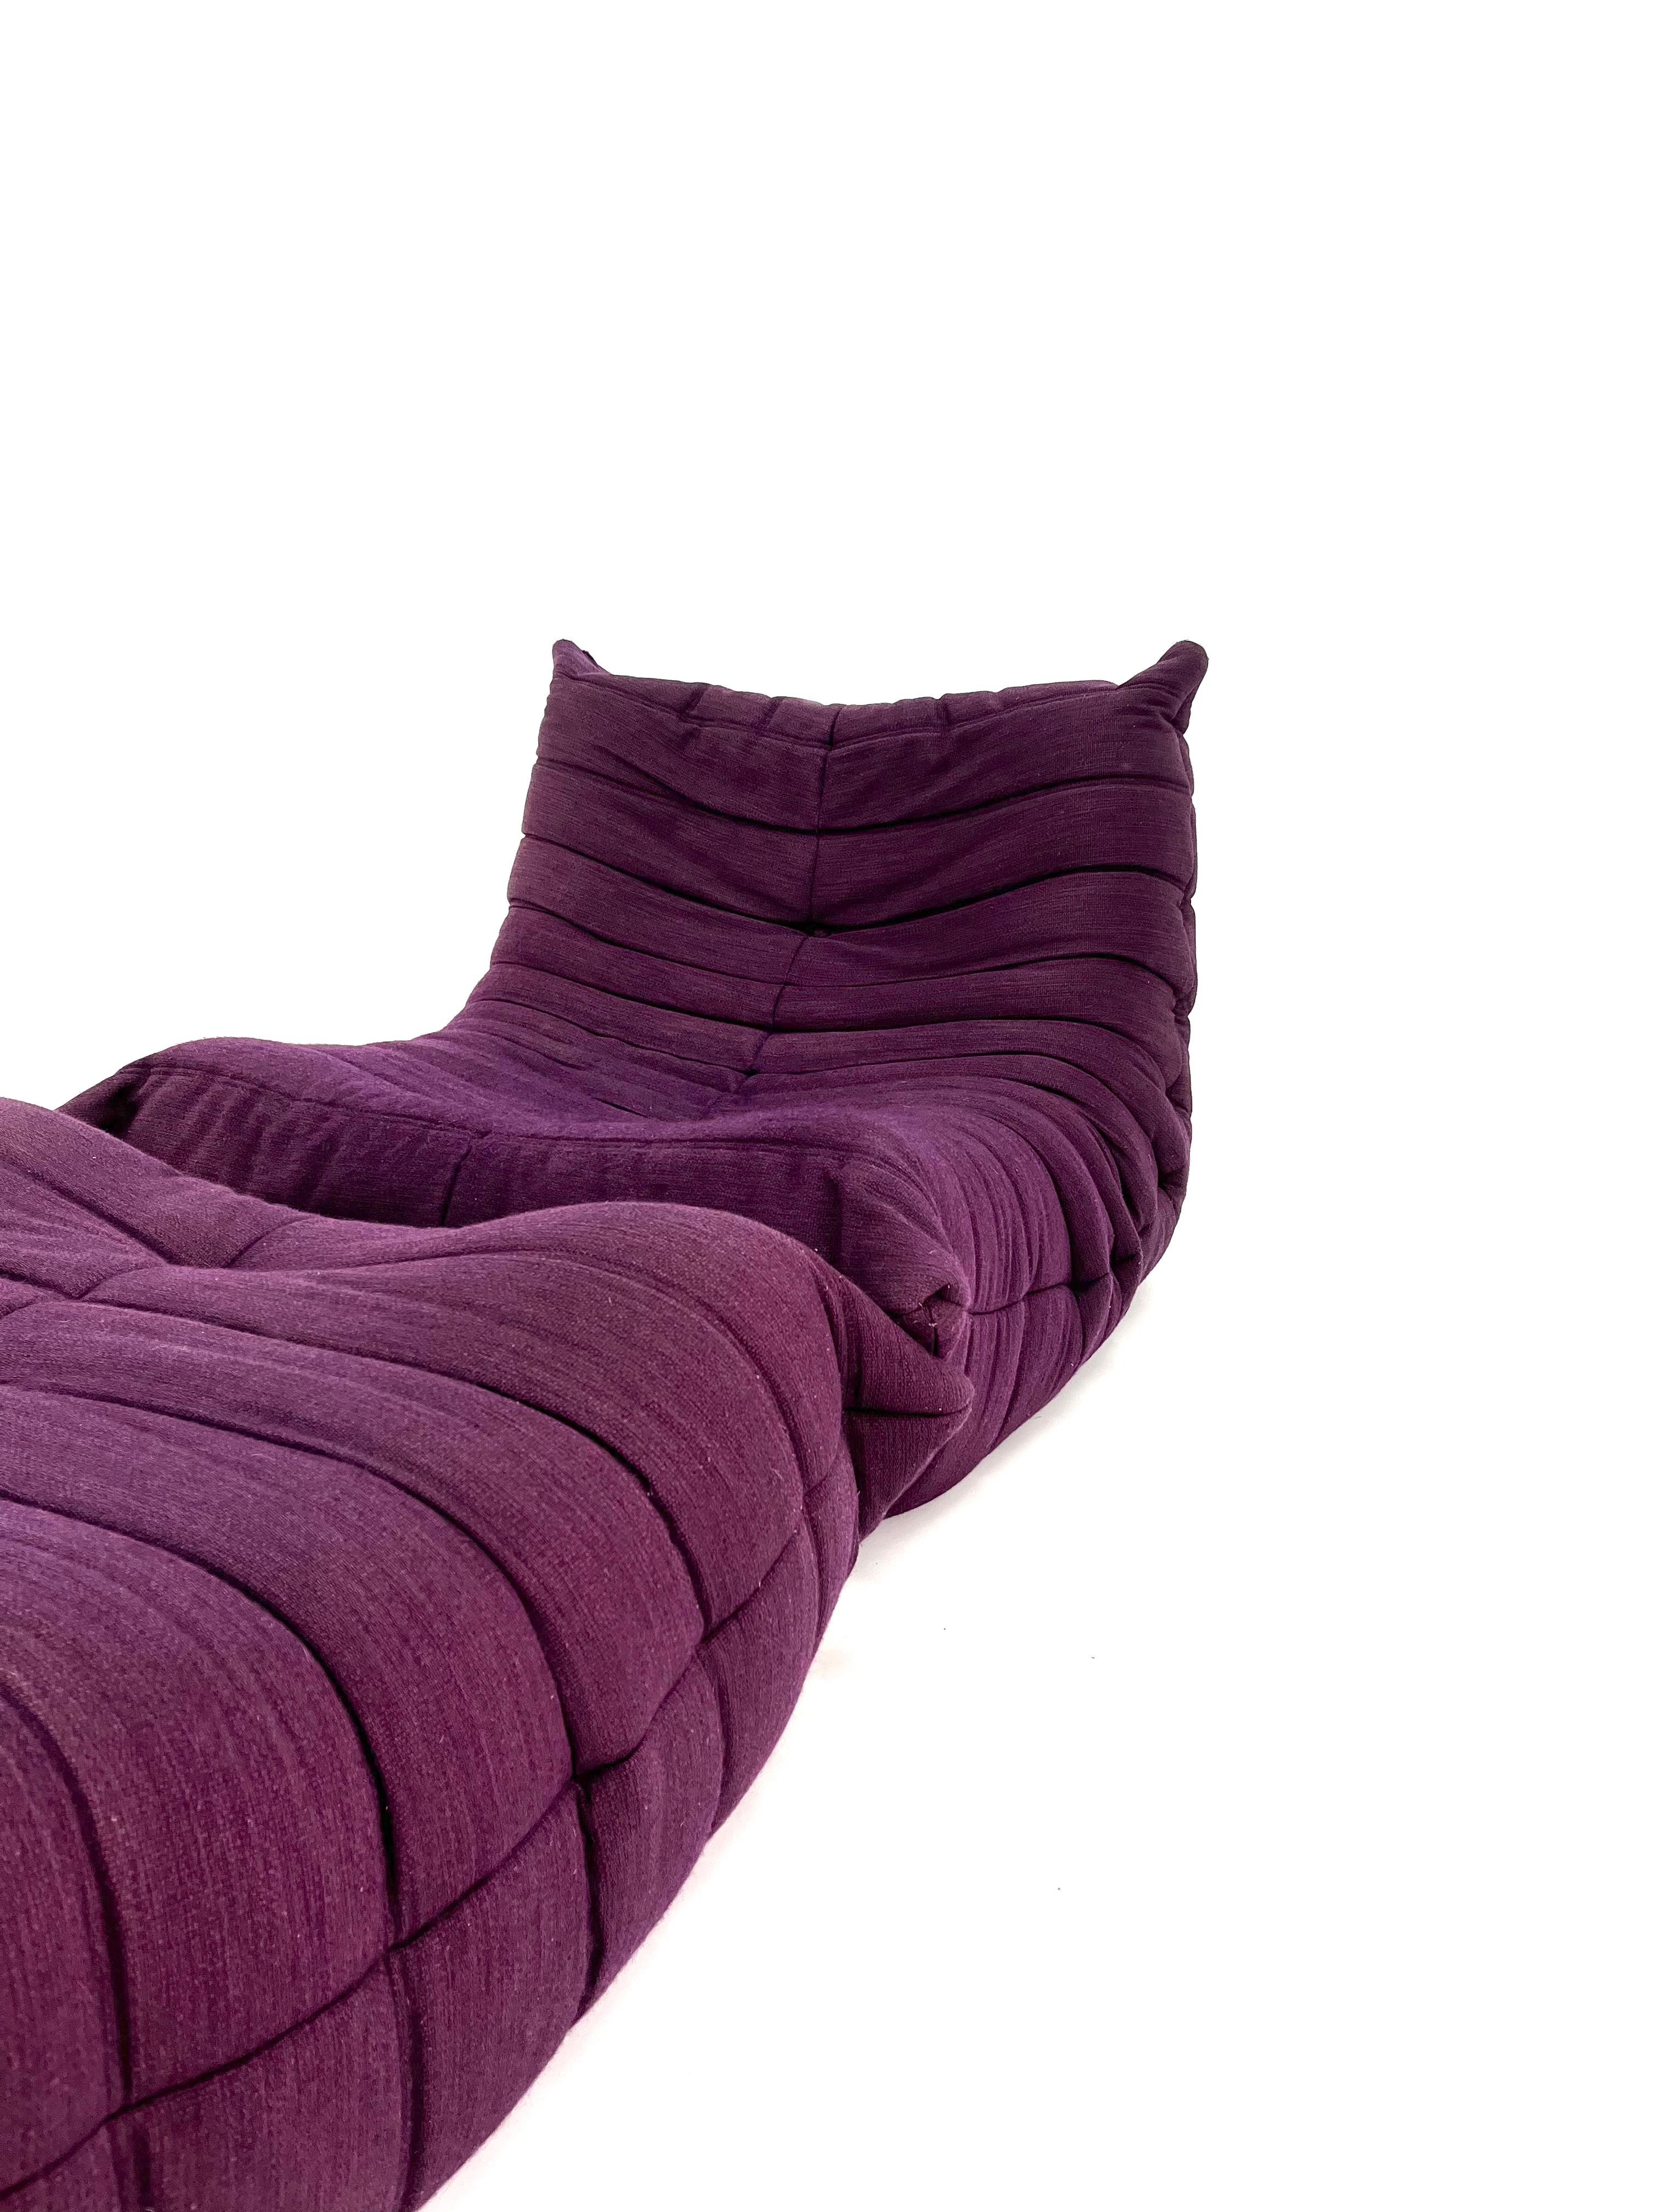 Togo Chair and Ottoman in Purple by Michel Ducaroy for Ligne Roset For Sale 1